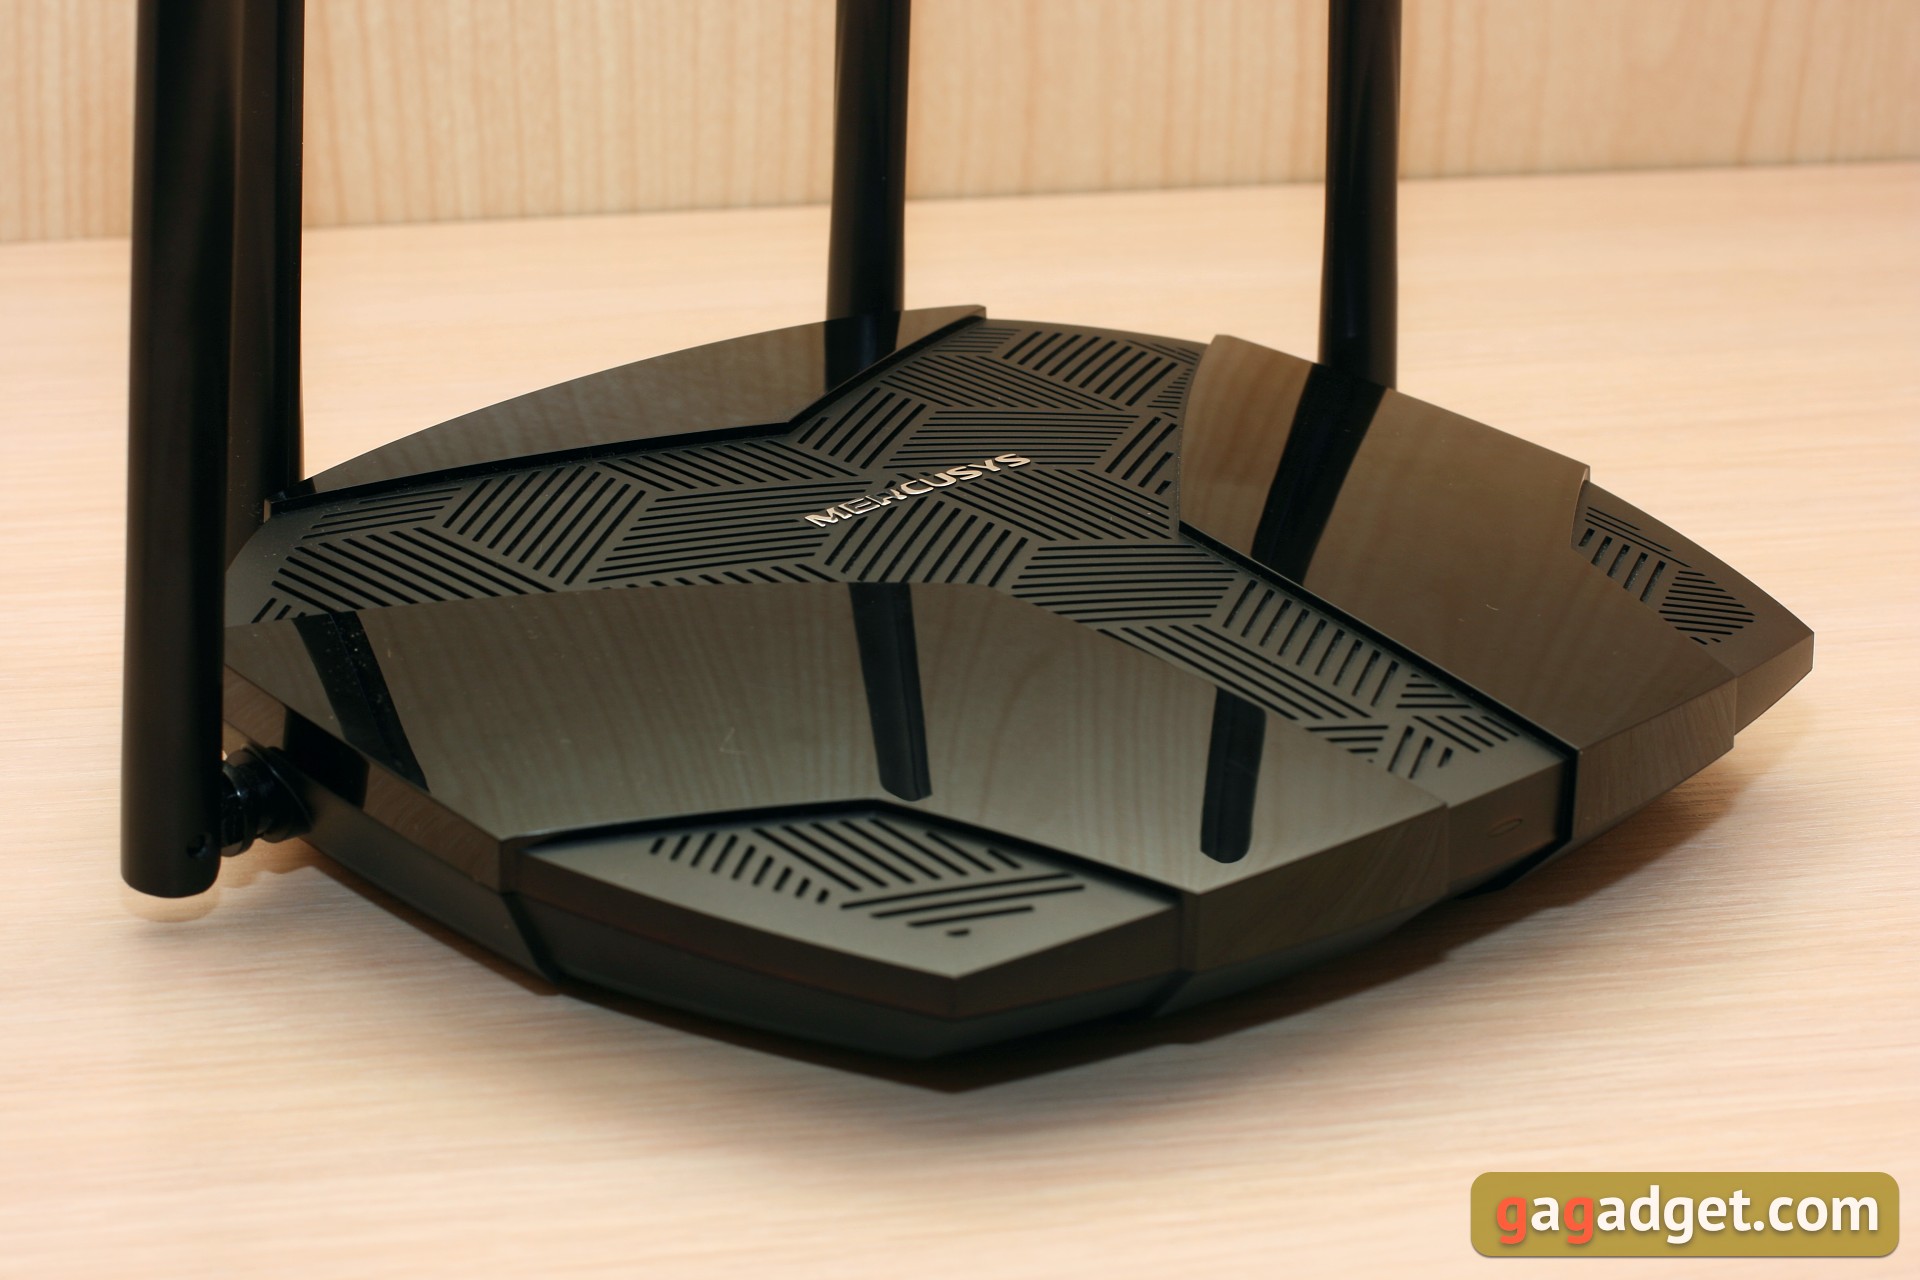 Mercusys MR70X review: the most affordable Gigabit router with Wi